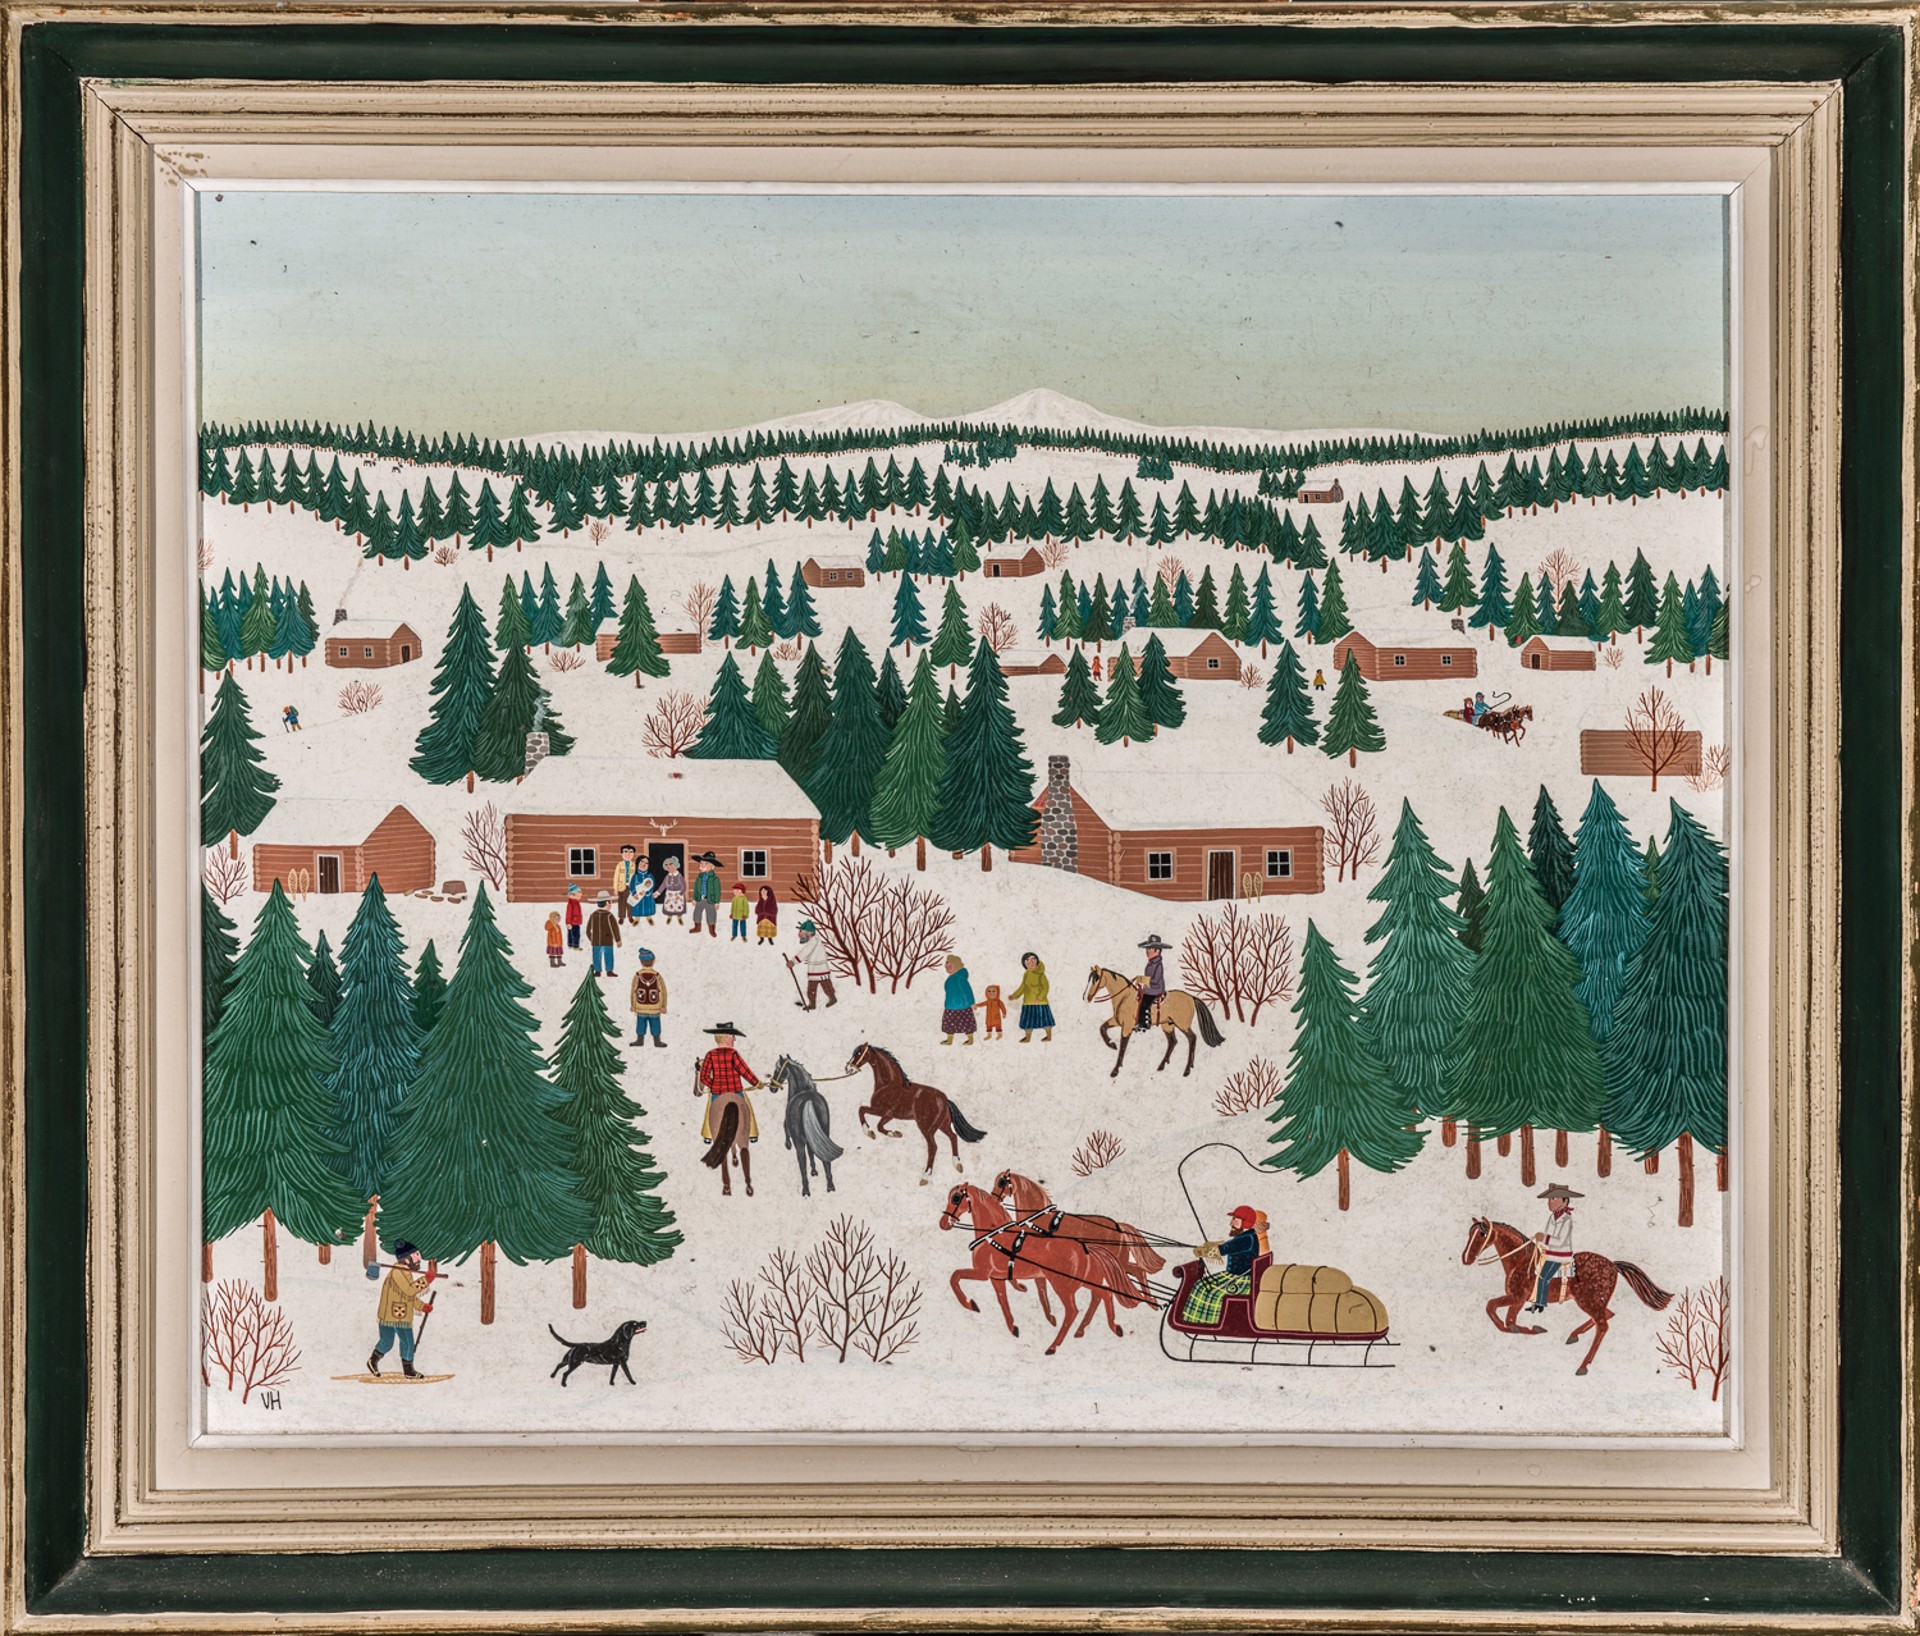 NATIVITY IN THE CARIBOO, B.C. CANADA by Vincent Haddelsey